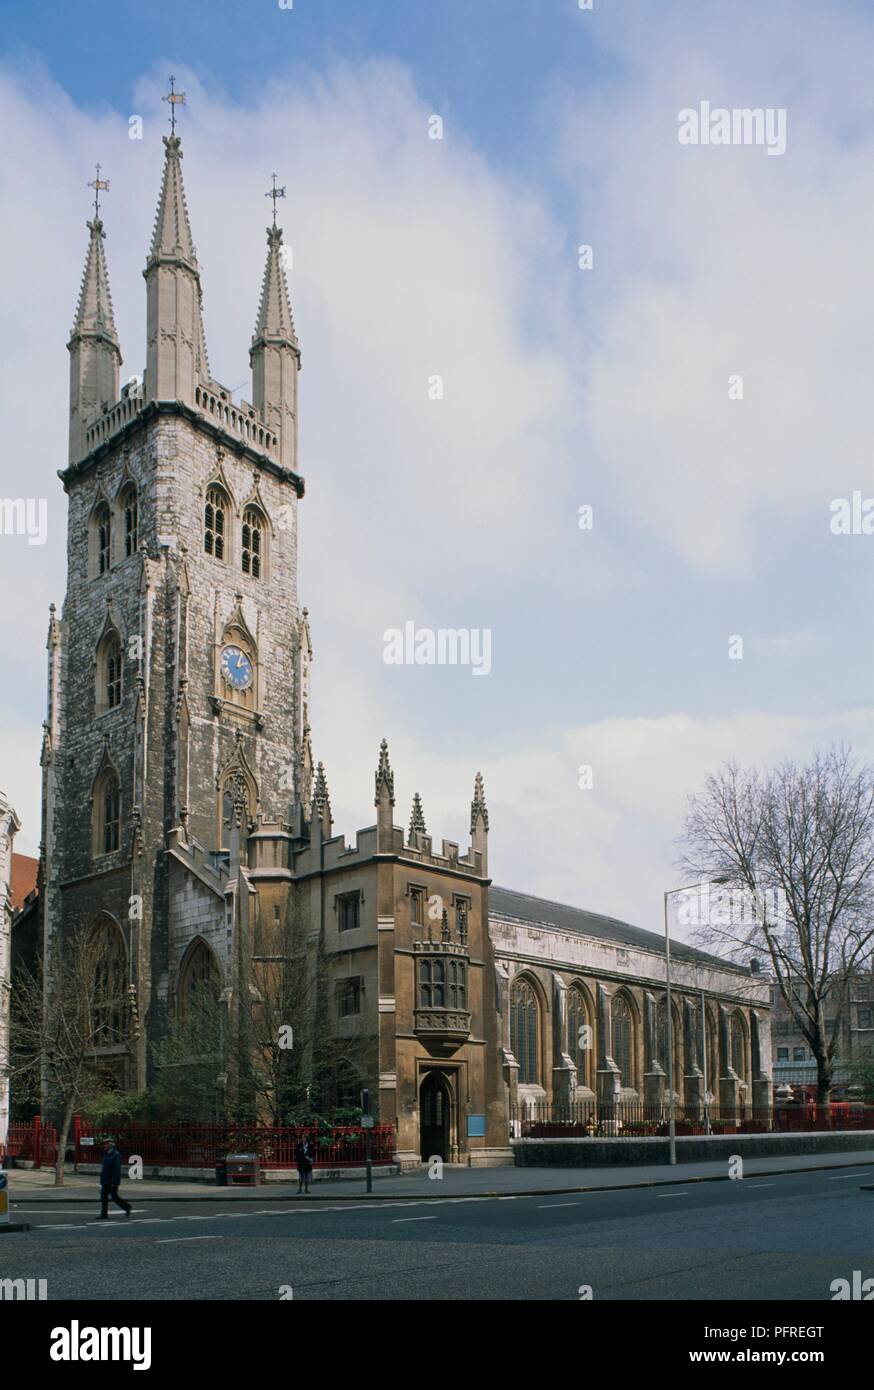 Great Britain, England, London, City of London, St-Sepulchre-without-Newgate, church exterior Stock Photo